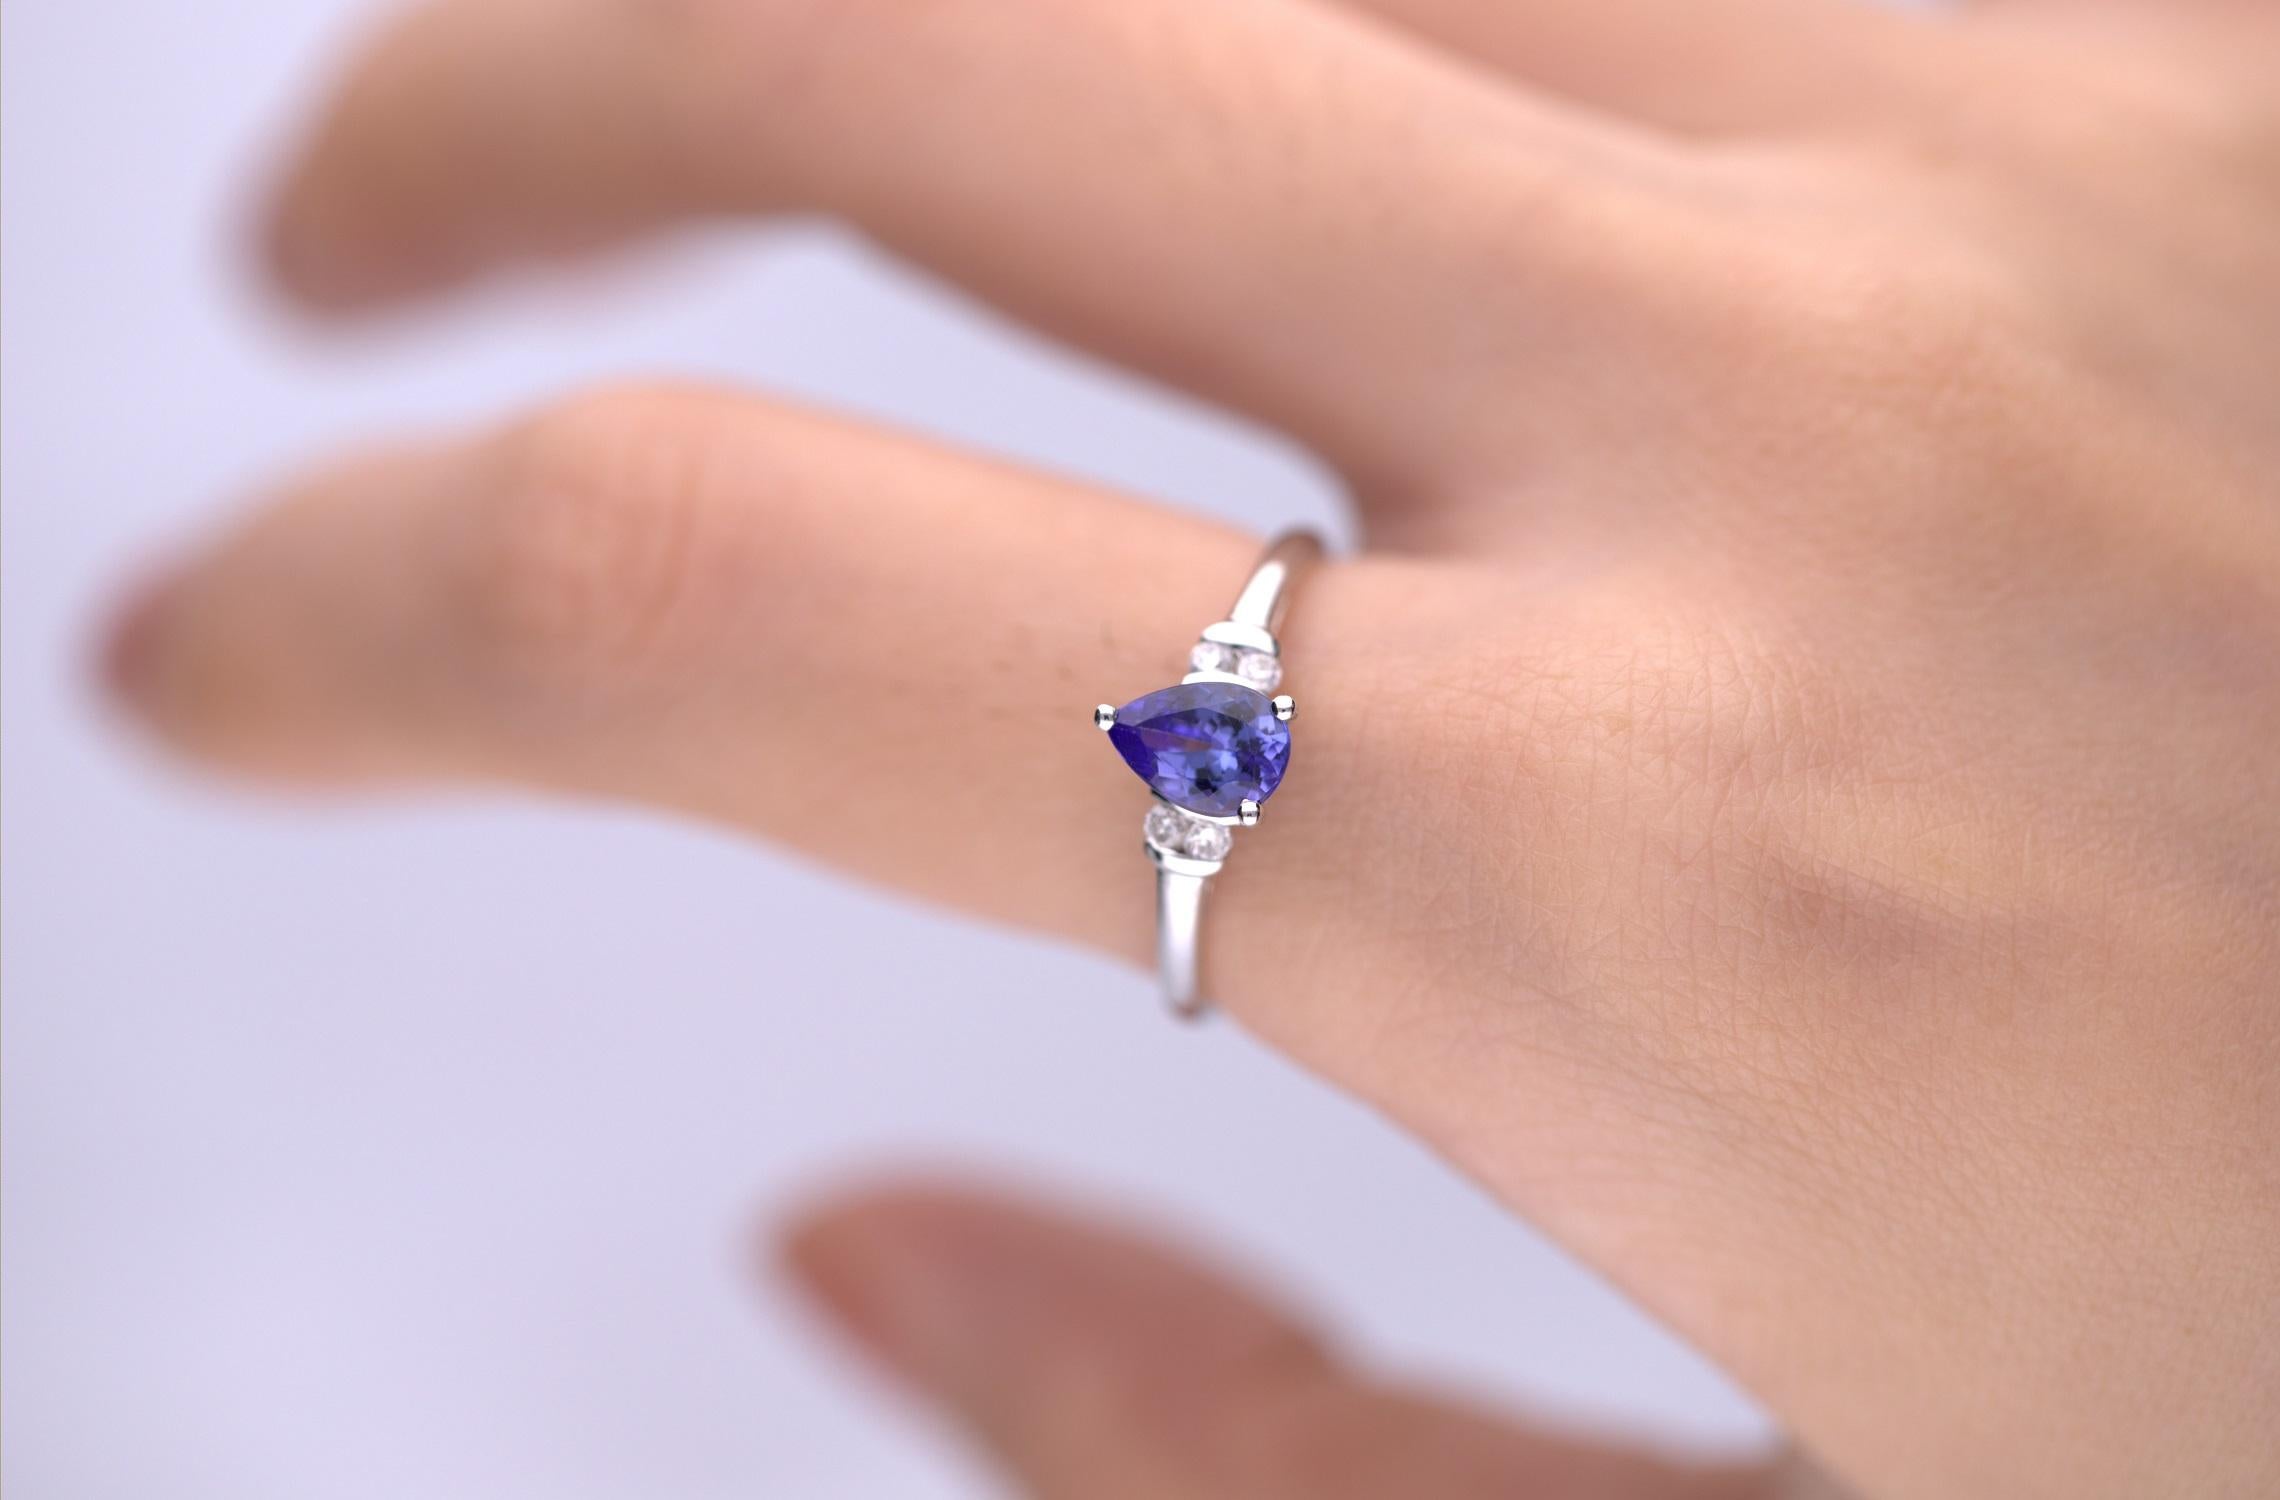 Stunning, timeless and classy eternity Unique ring. Decorate yourself in luxury with this Gin & Grace ring. The 10k White Gold jewelry boasts Pear-Cut Prong Setting Genuine Tanzanite (1pcs) 0.71 Carat and Round-Cut Prong Setting Diamond (4 pcs) 0.09